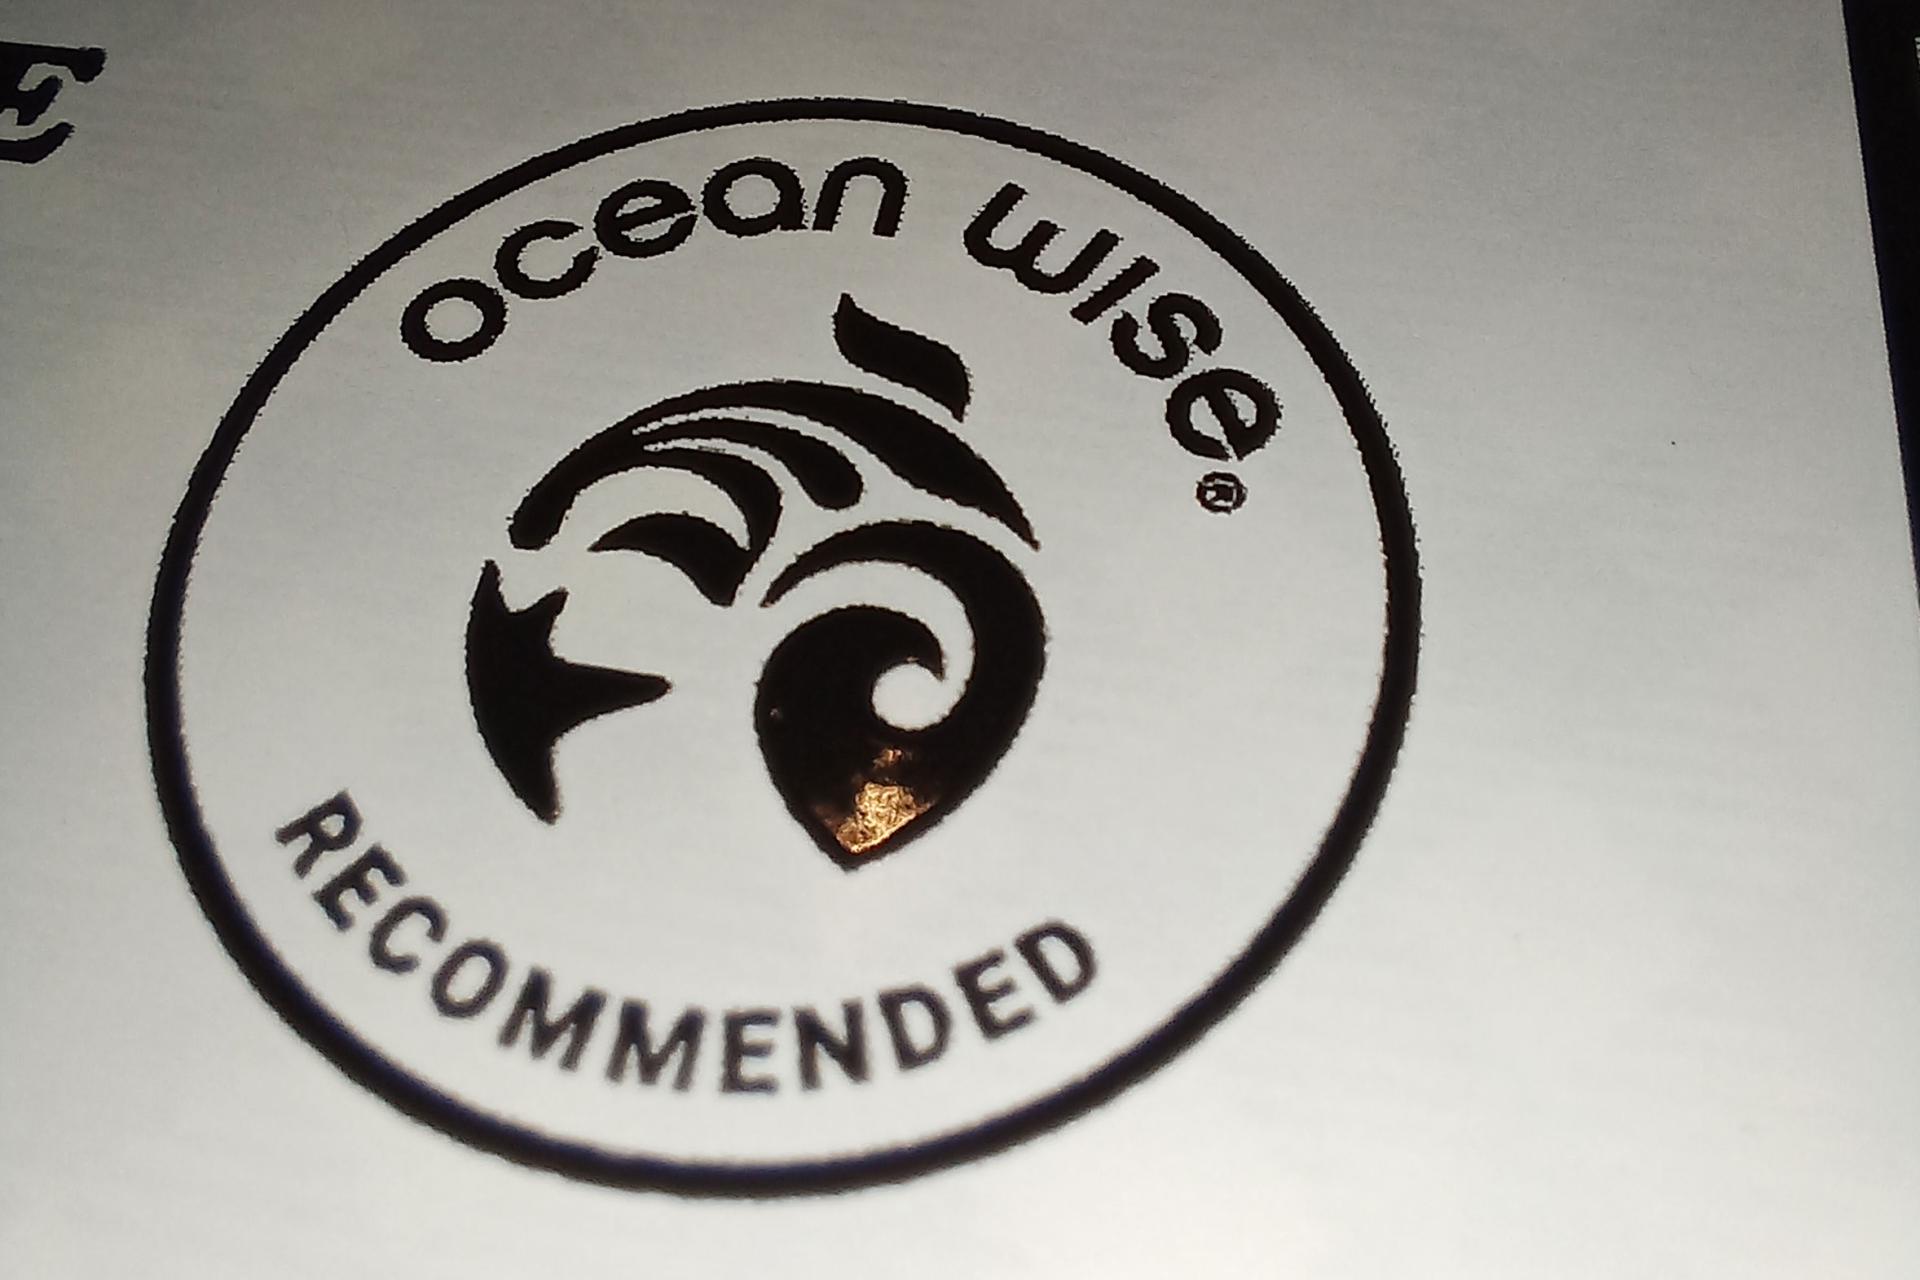 Ocean Wise logo label printed onto white surface